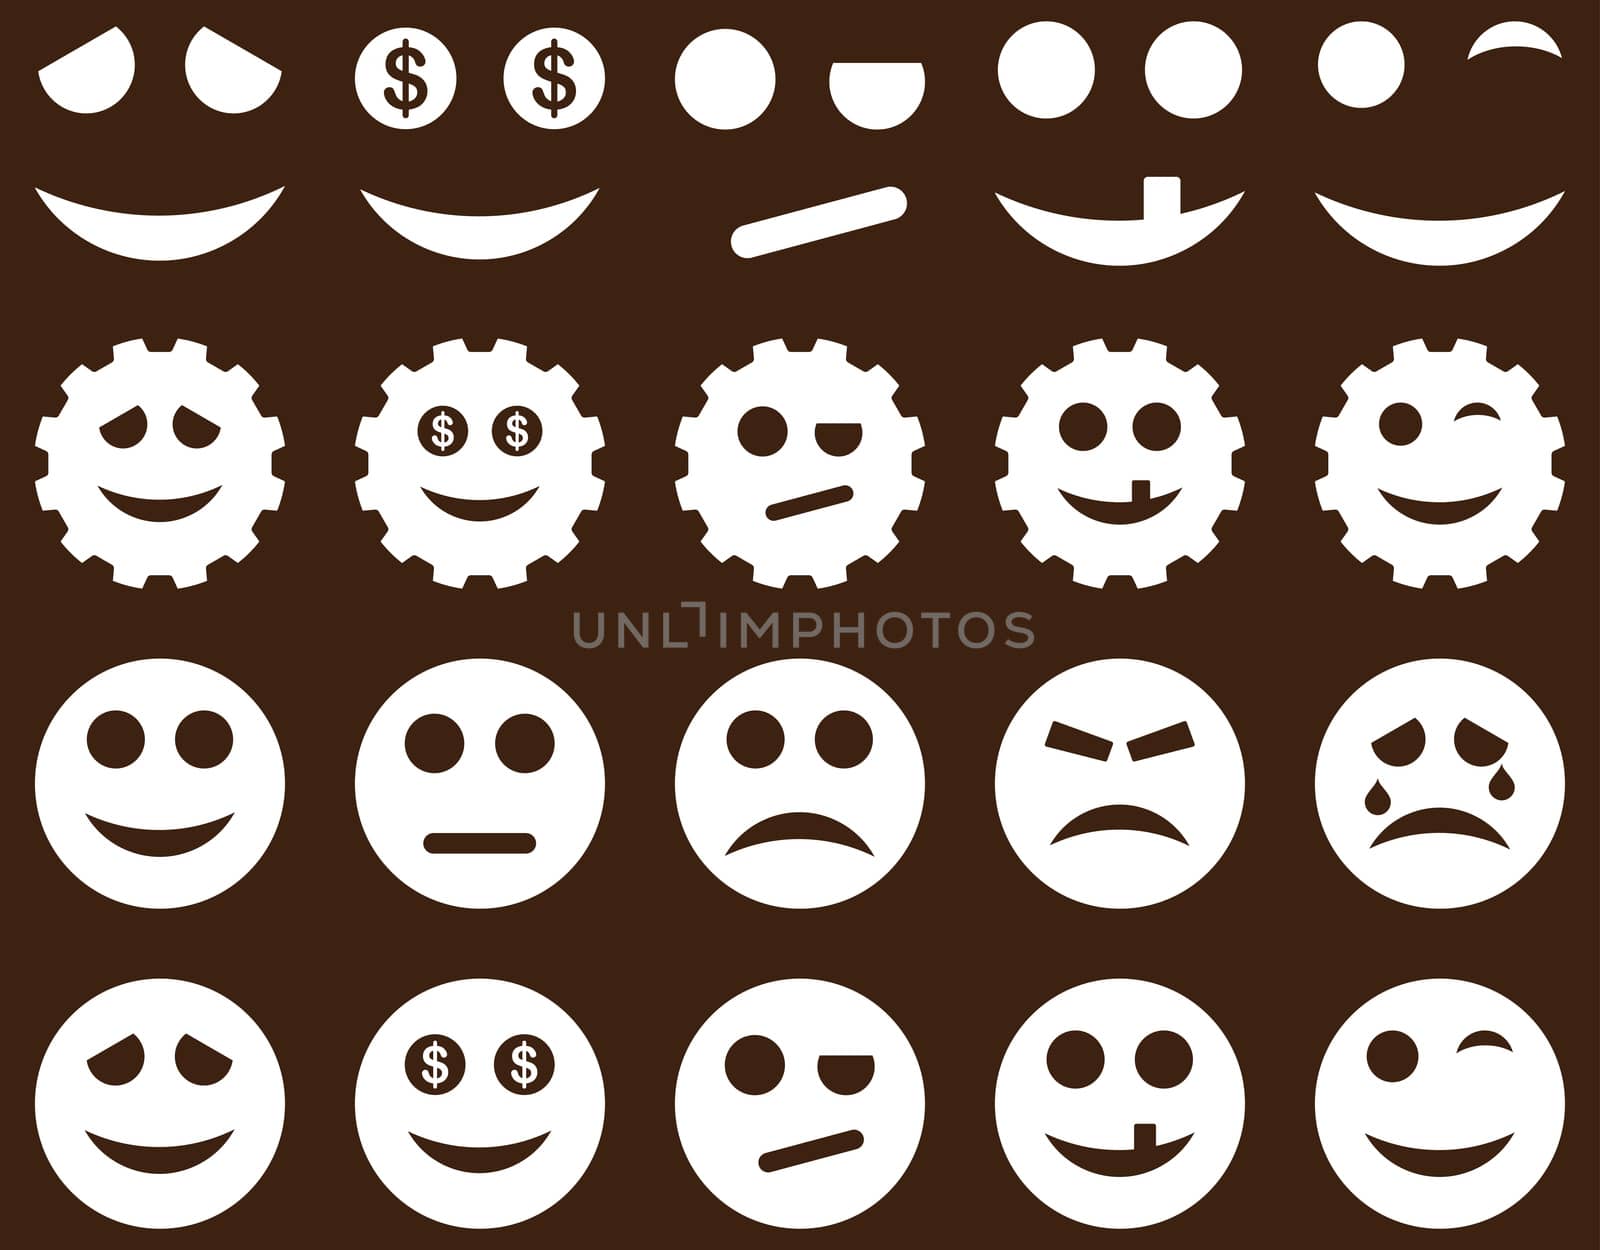 Tools, gears, smiles, emoticons icons. Glyph set style is flat images, white symbols, isolated on a brown background.